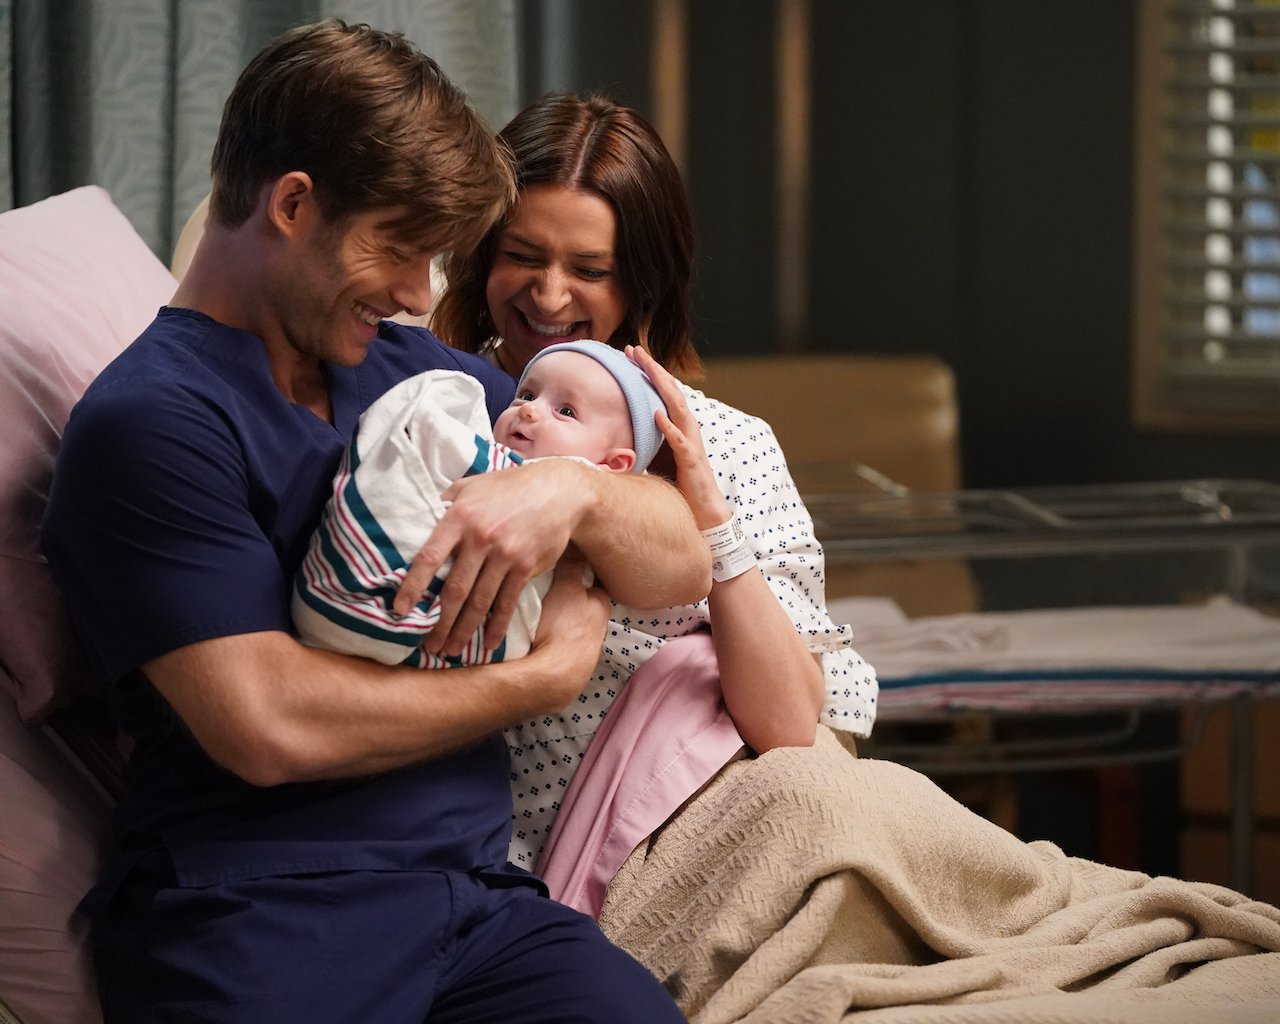 Amelia and Link are in the hospital bed with their newborn on 'Grey's Anatomy'